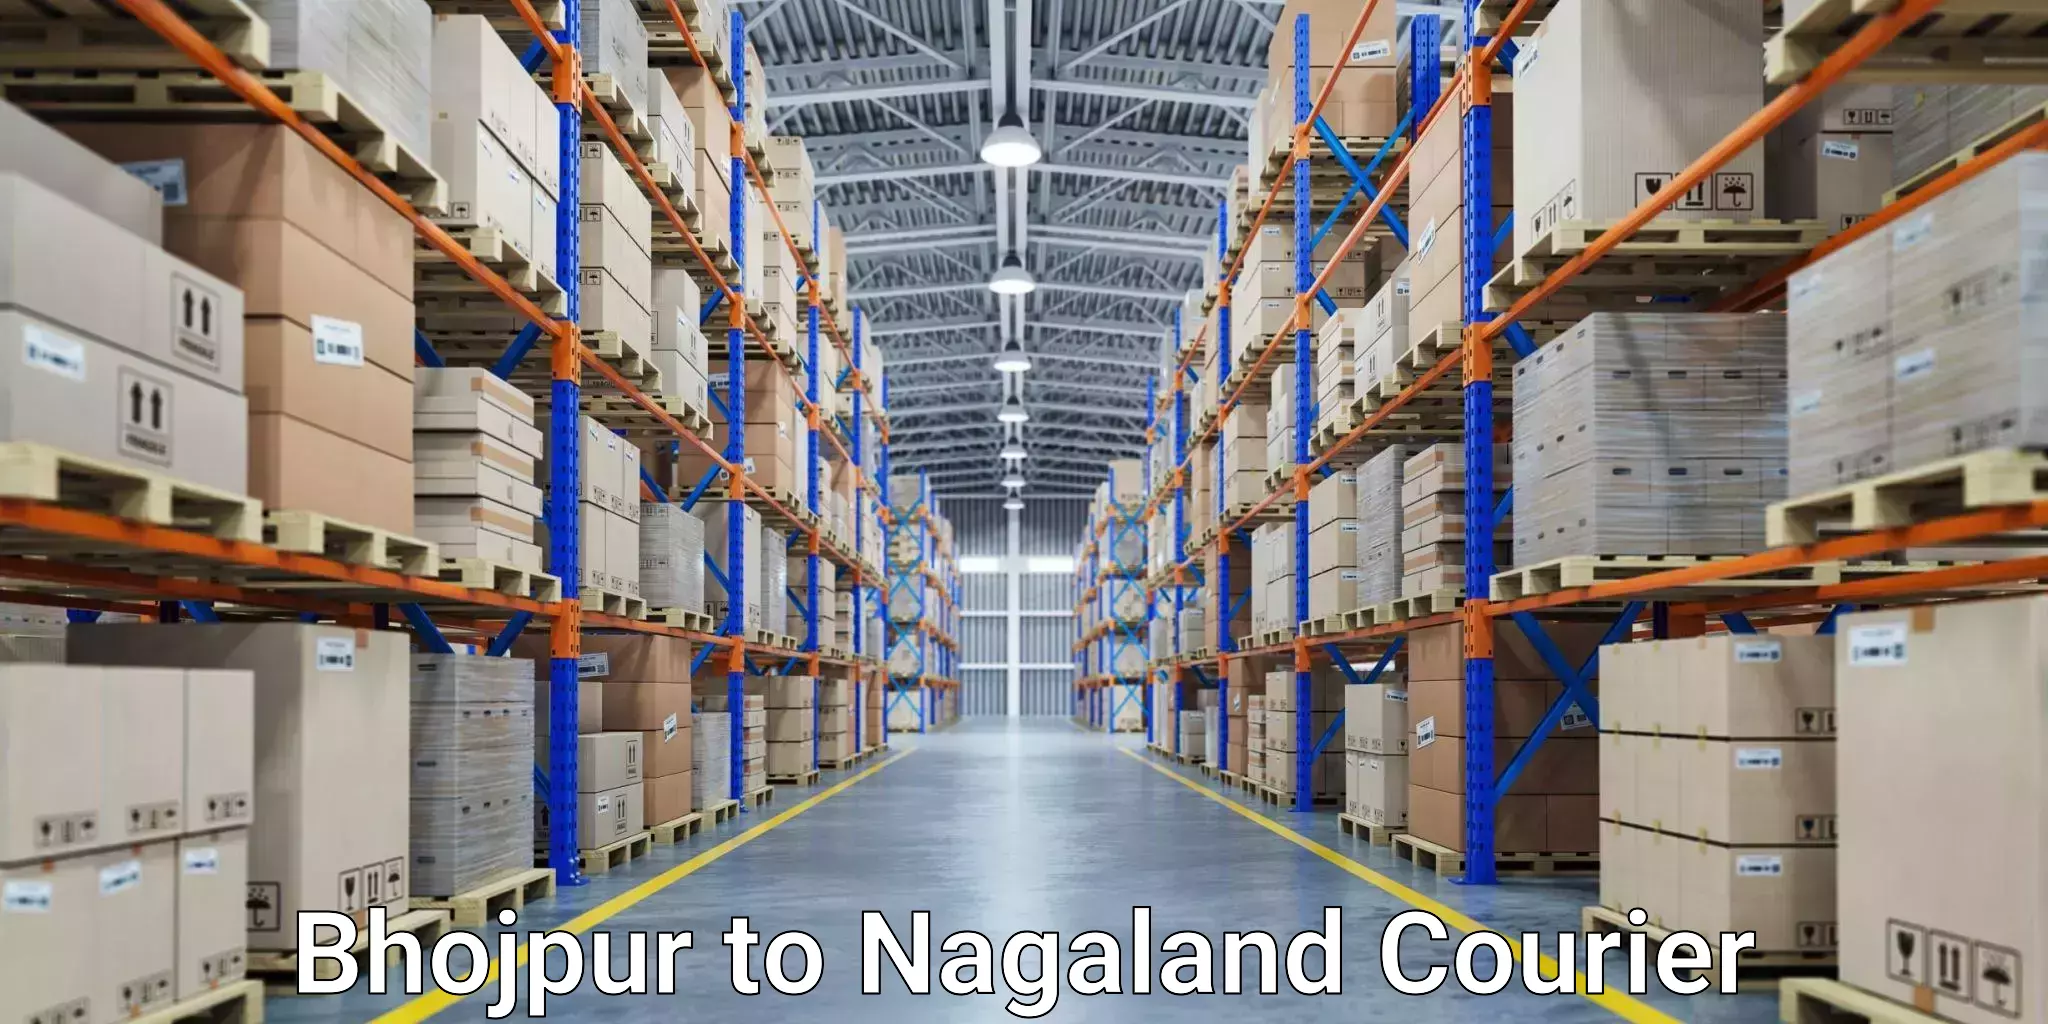 User-friendly courier app Bhojpur to Nagaland